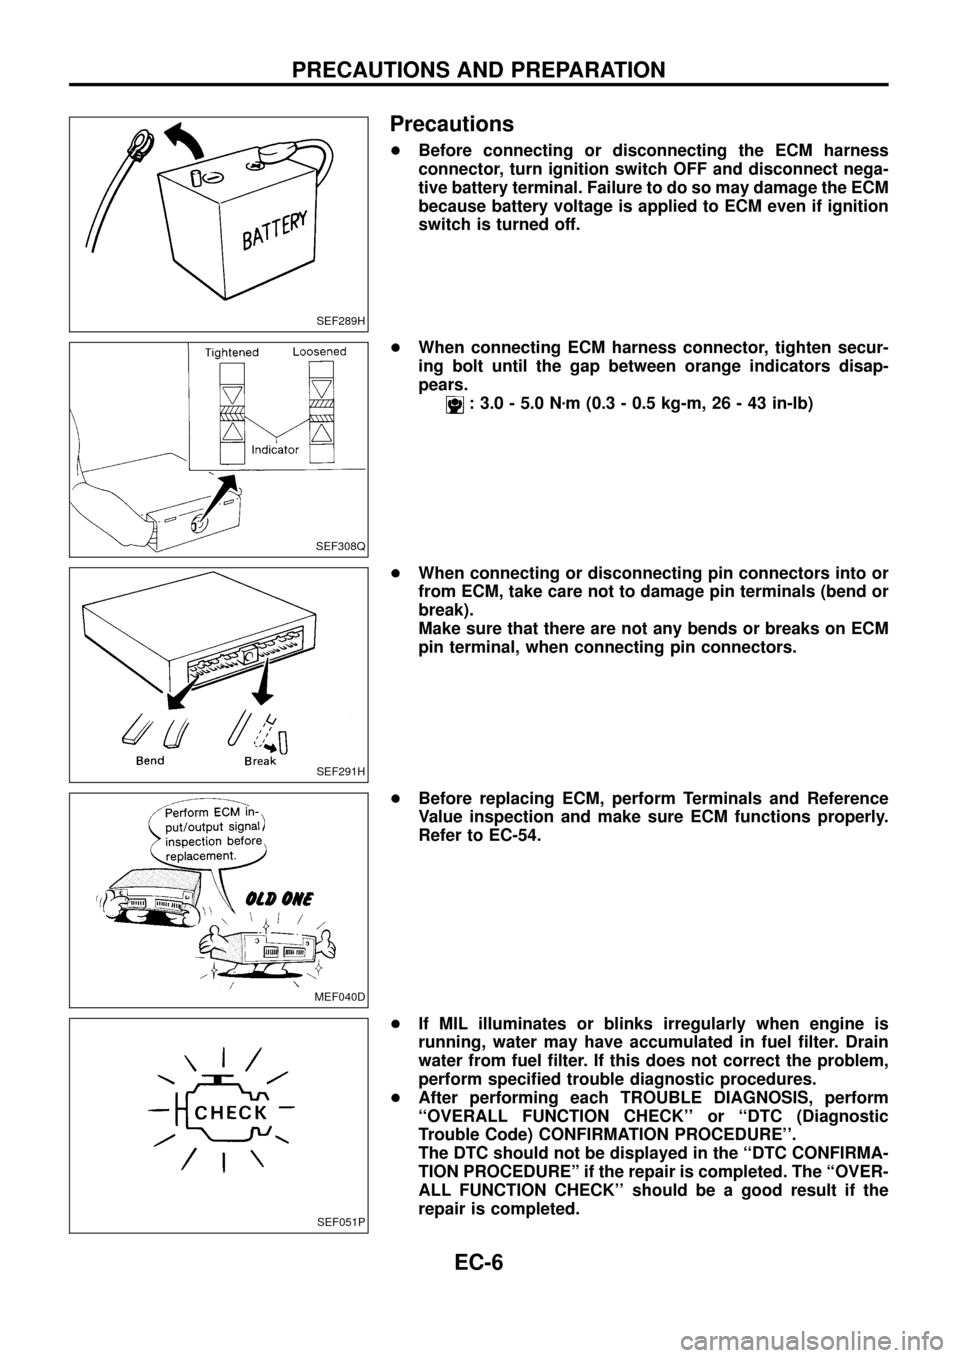 NISSAN PATROL 1998 Y61 / 5.G Engine Control Workshop Manual Precautions
+Before connecting or disconnecting the ECM harness
connector, turn ignition switch OFF and disconnect nega-
tive battery terminal. Failure to do so may damage the ECM
because battery volt